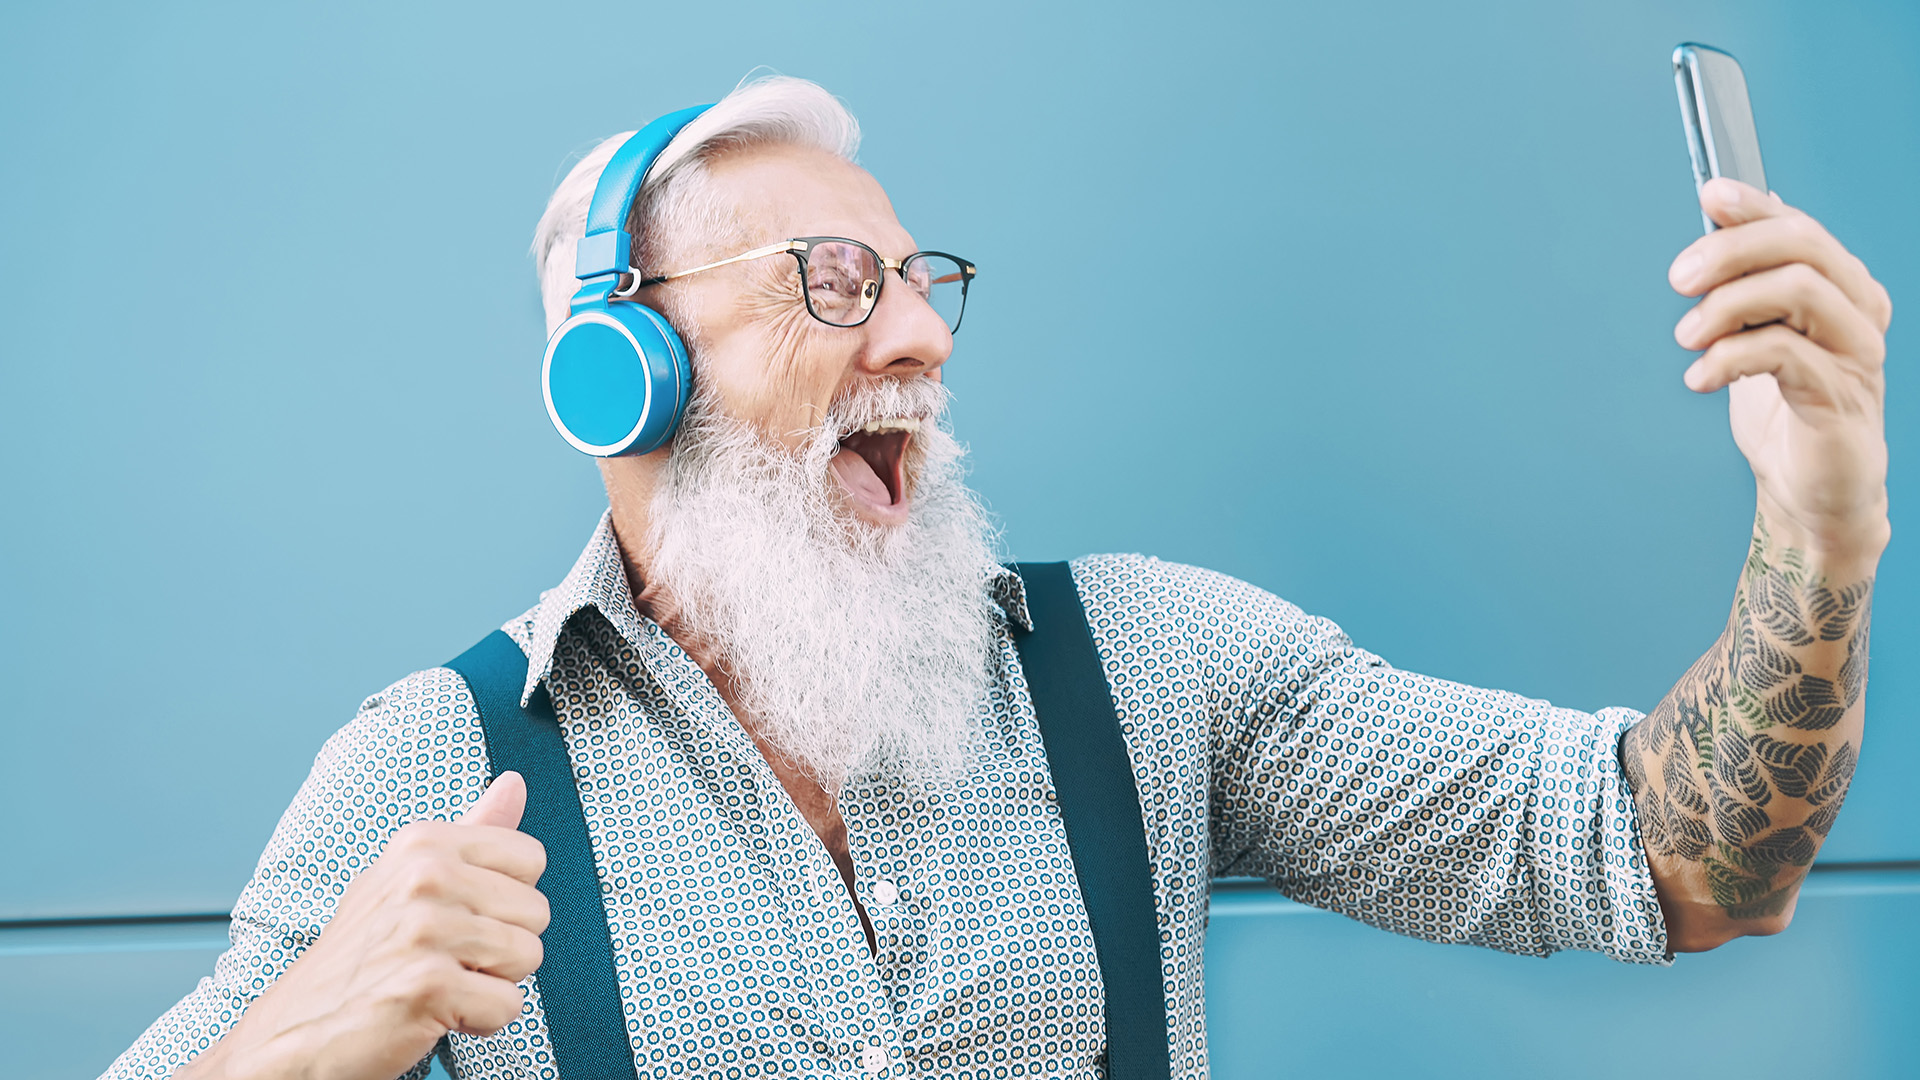 Happy senior male having fun using mobile smartphone playlist apps - technology and elderly lifestyle people concept for digital marketing